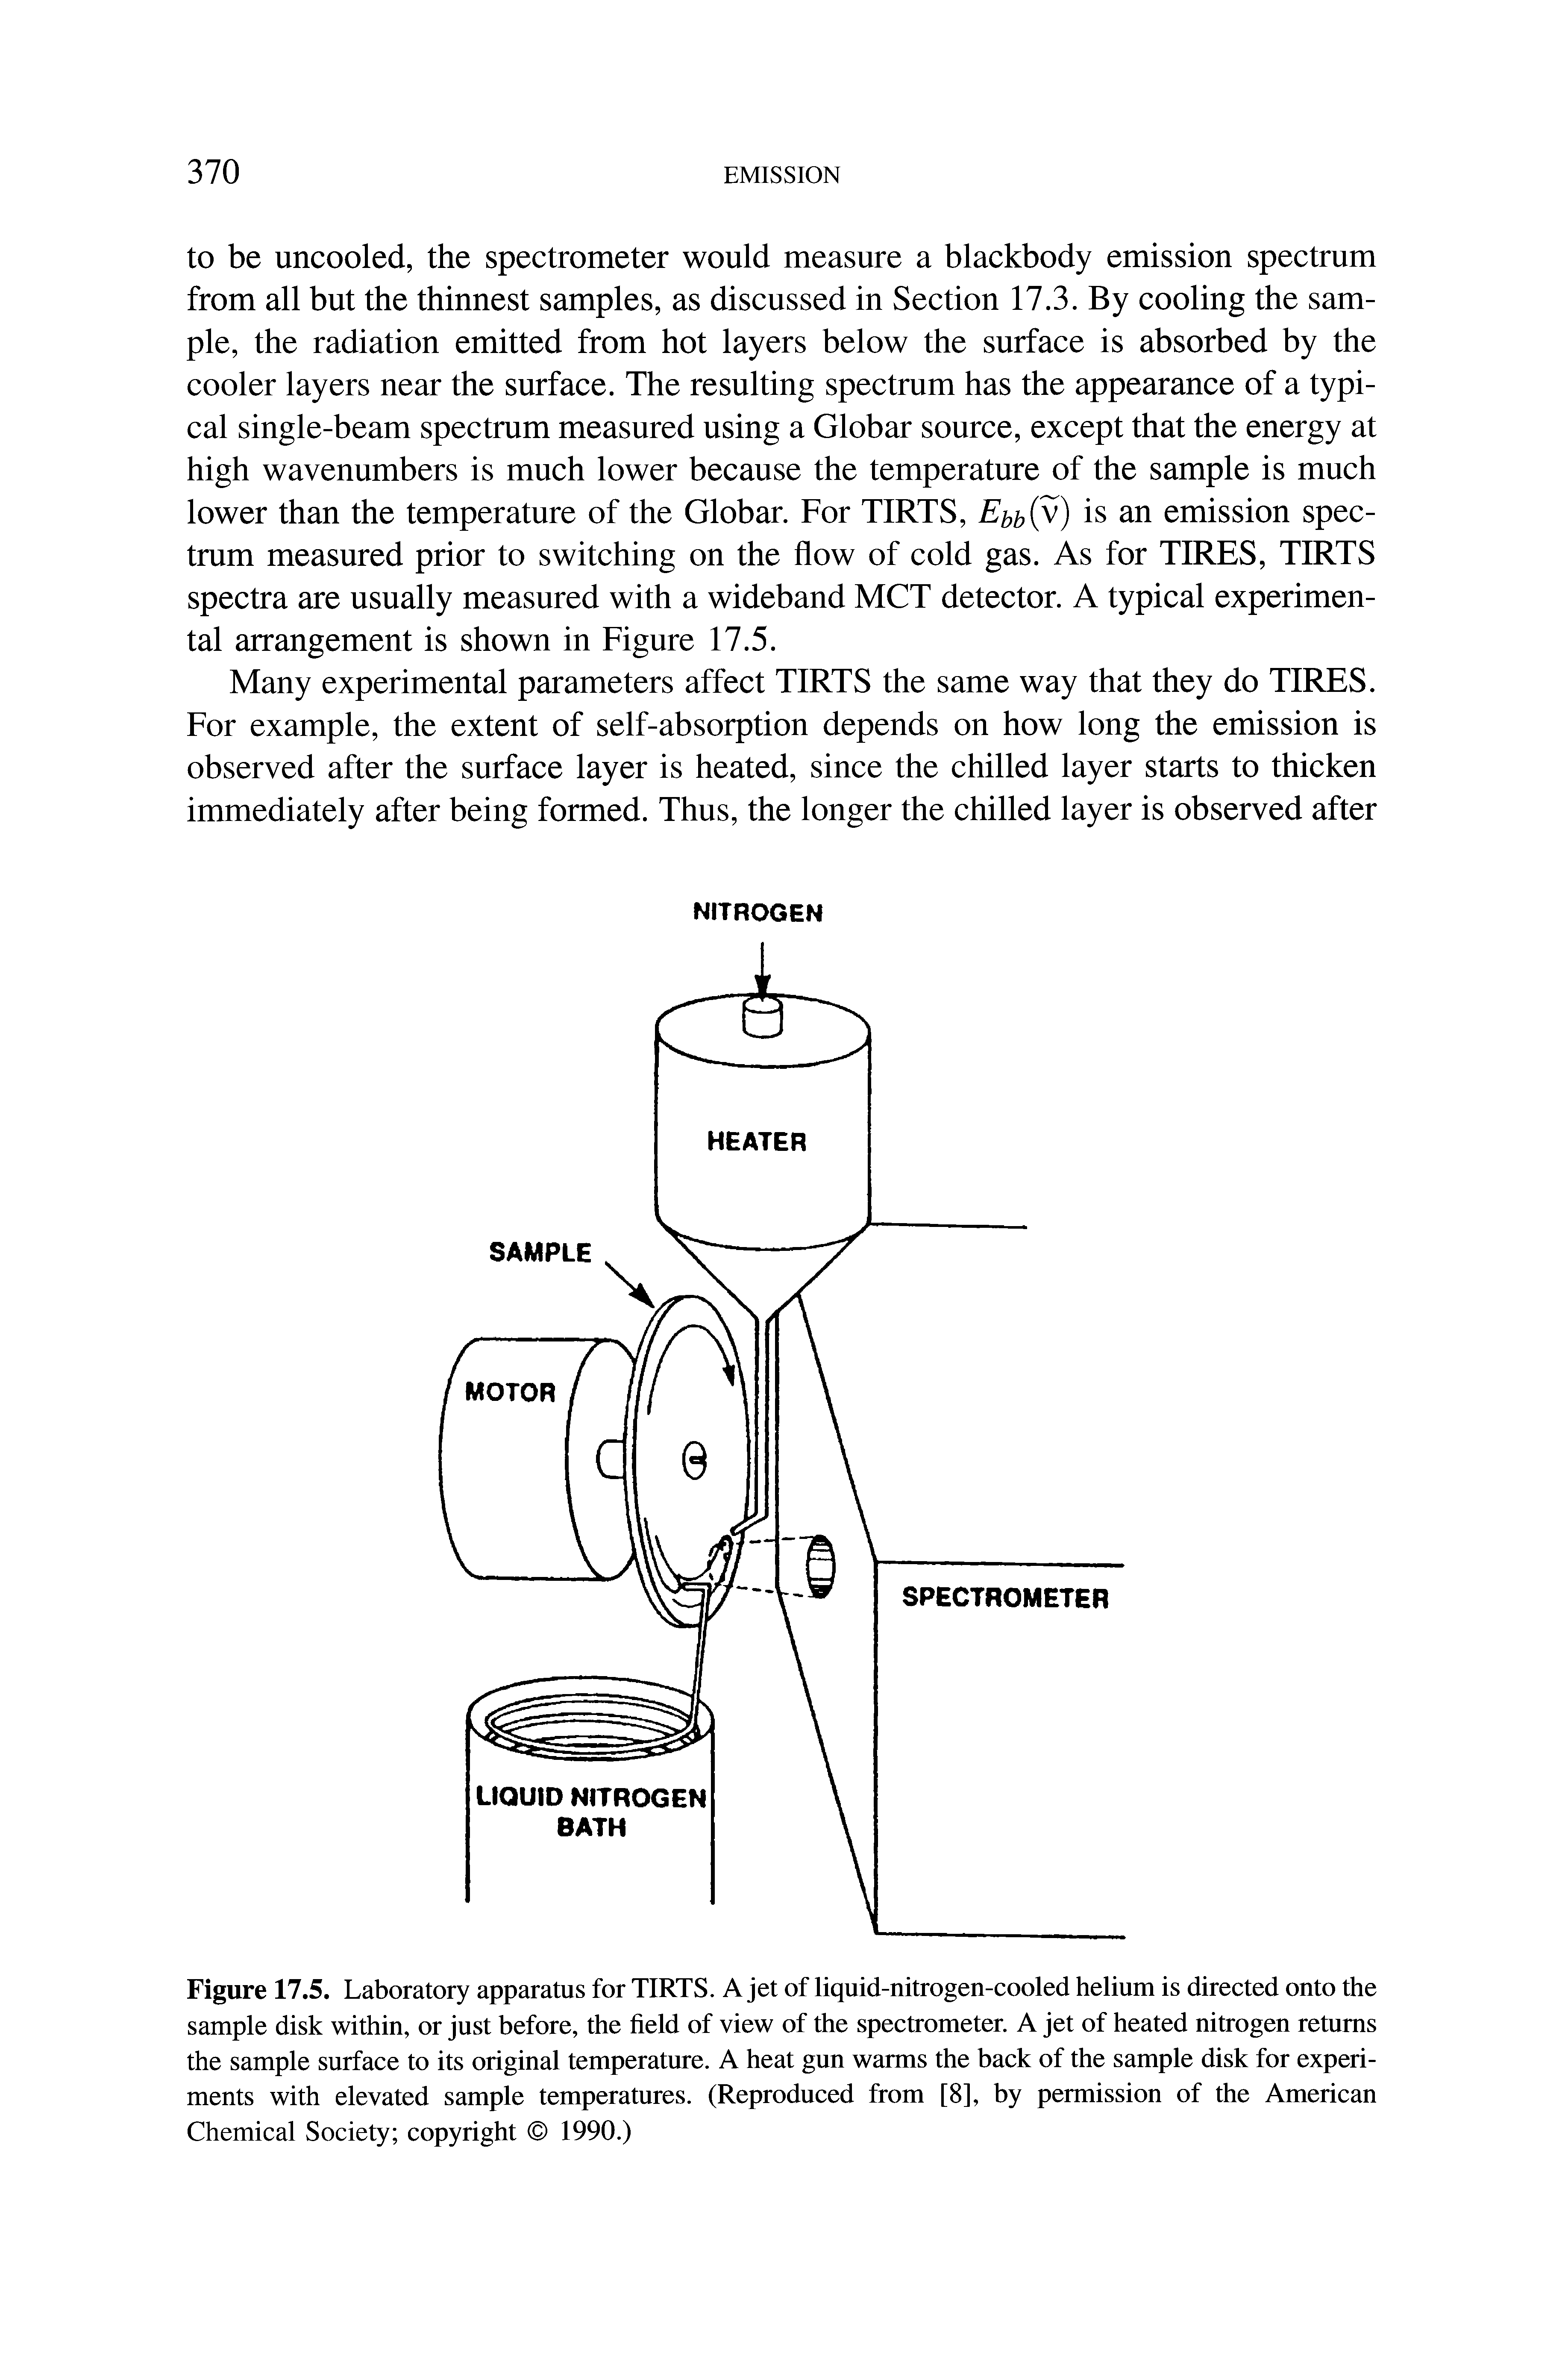 Figure 17.5. Laboratory apparatus for TIRTS. A jet of liquid-nitrogen-cooled helium is directed onto the sample disk within, or just before, the field of view of the spectrometer. A jet of heated nitrogen returns the sample surface to its original temperature. A heat gun warms the back of the sample disk for experiments with elevated sample temperatures. (Reproduced from [8], by permission of the American Chemical Society copyright 1990.)...